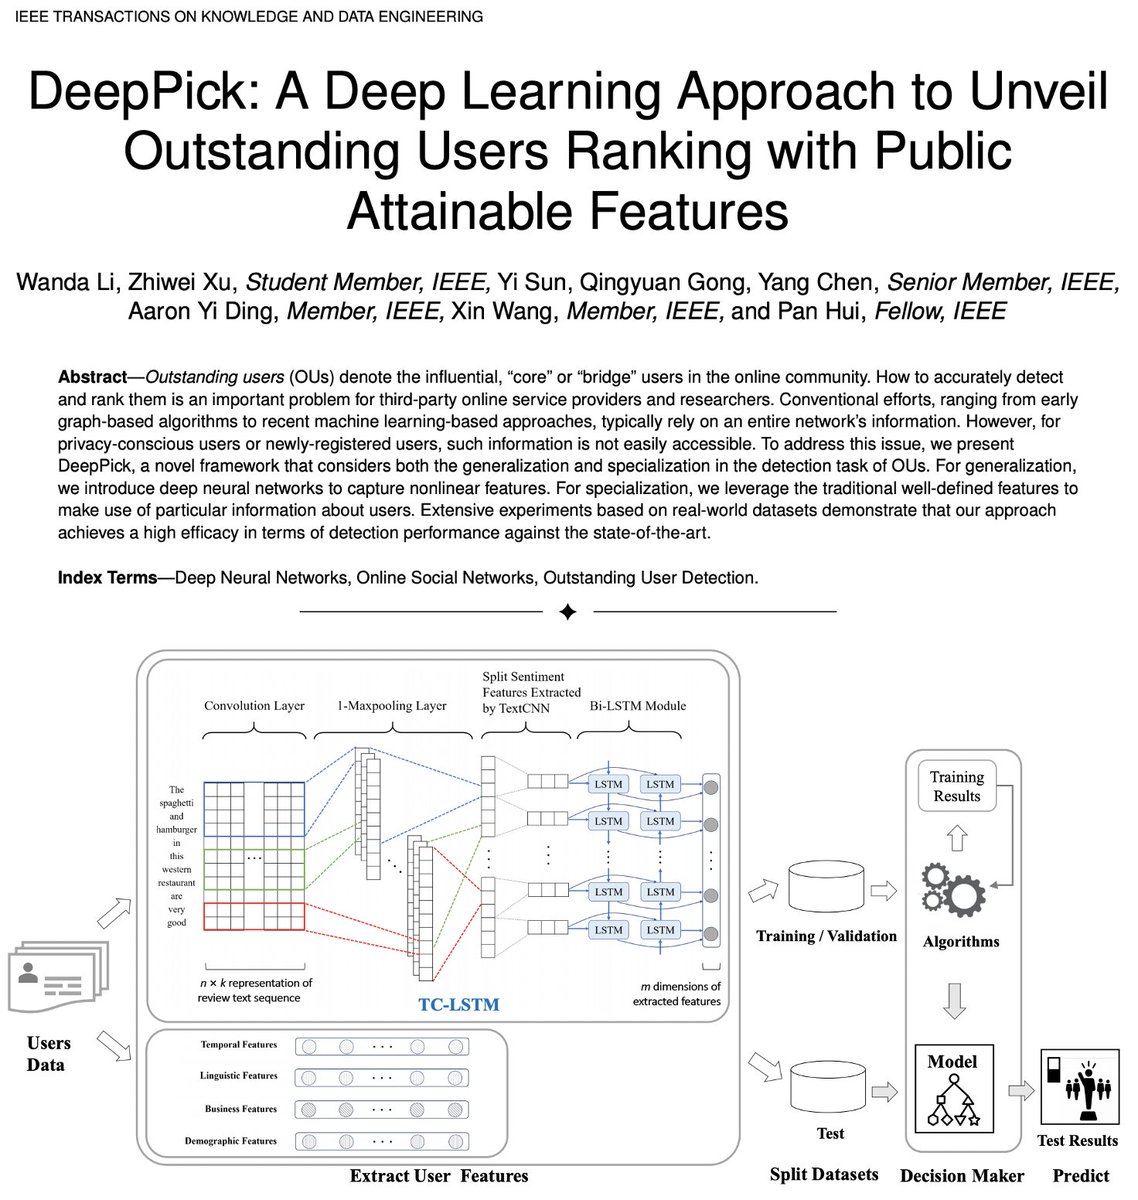 How to unveil outstanding users in community? check our latest work #DeepPick at IEEE Transactions on Knowledge and Data Engineering (IEEE #TKDE) together with Fudan, HKUST & Helsinki @yeung2000 @HMarijn @markdereuver @ConsumerSurv @Lab_CPI @tudelftTBM:
https://t.co/XYwNF8eUcQ https://t.co/AQCZTIxkXJ